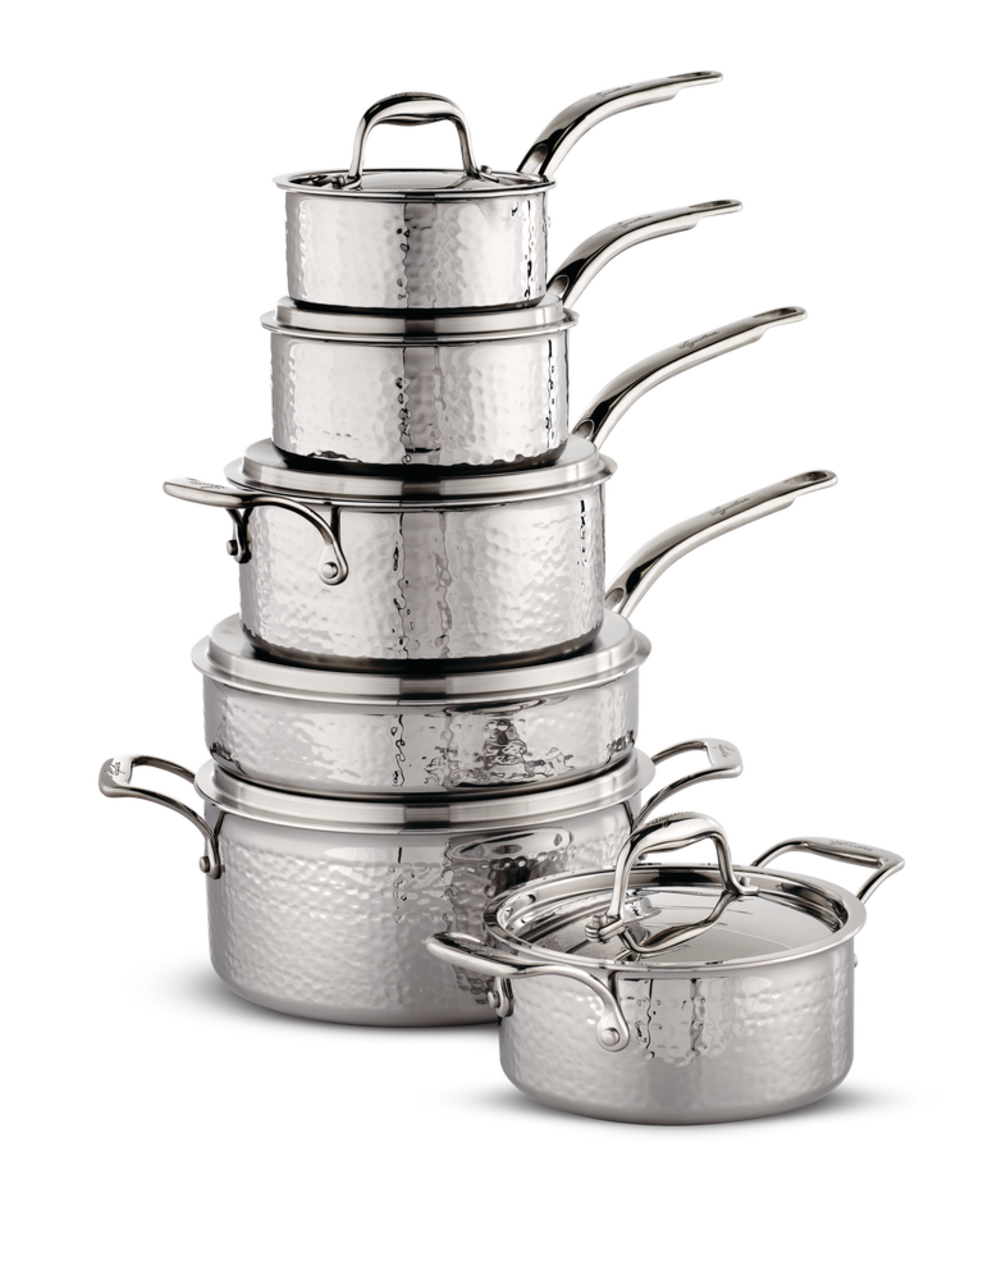 https://media-www.canadiantire.ca/product/living/kitchen/cookware/1428332/lagostina-12-piece-hand-hammered-cookware-set-37b5336b-d5c9-404f-bcb4-fdf4699aeb16.png?imdensity=1&imwidth=640&impolicy=mZoom